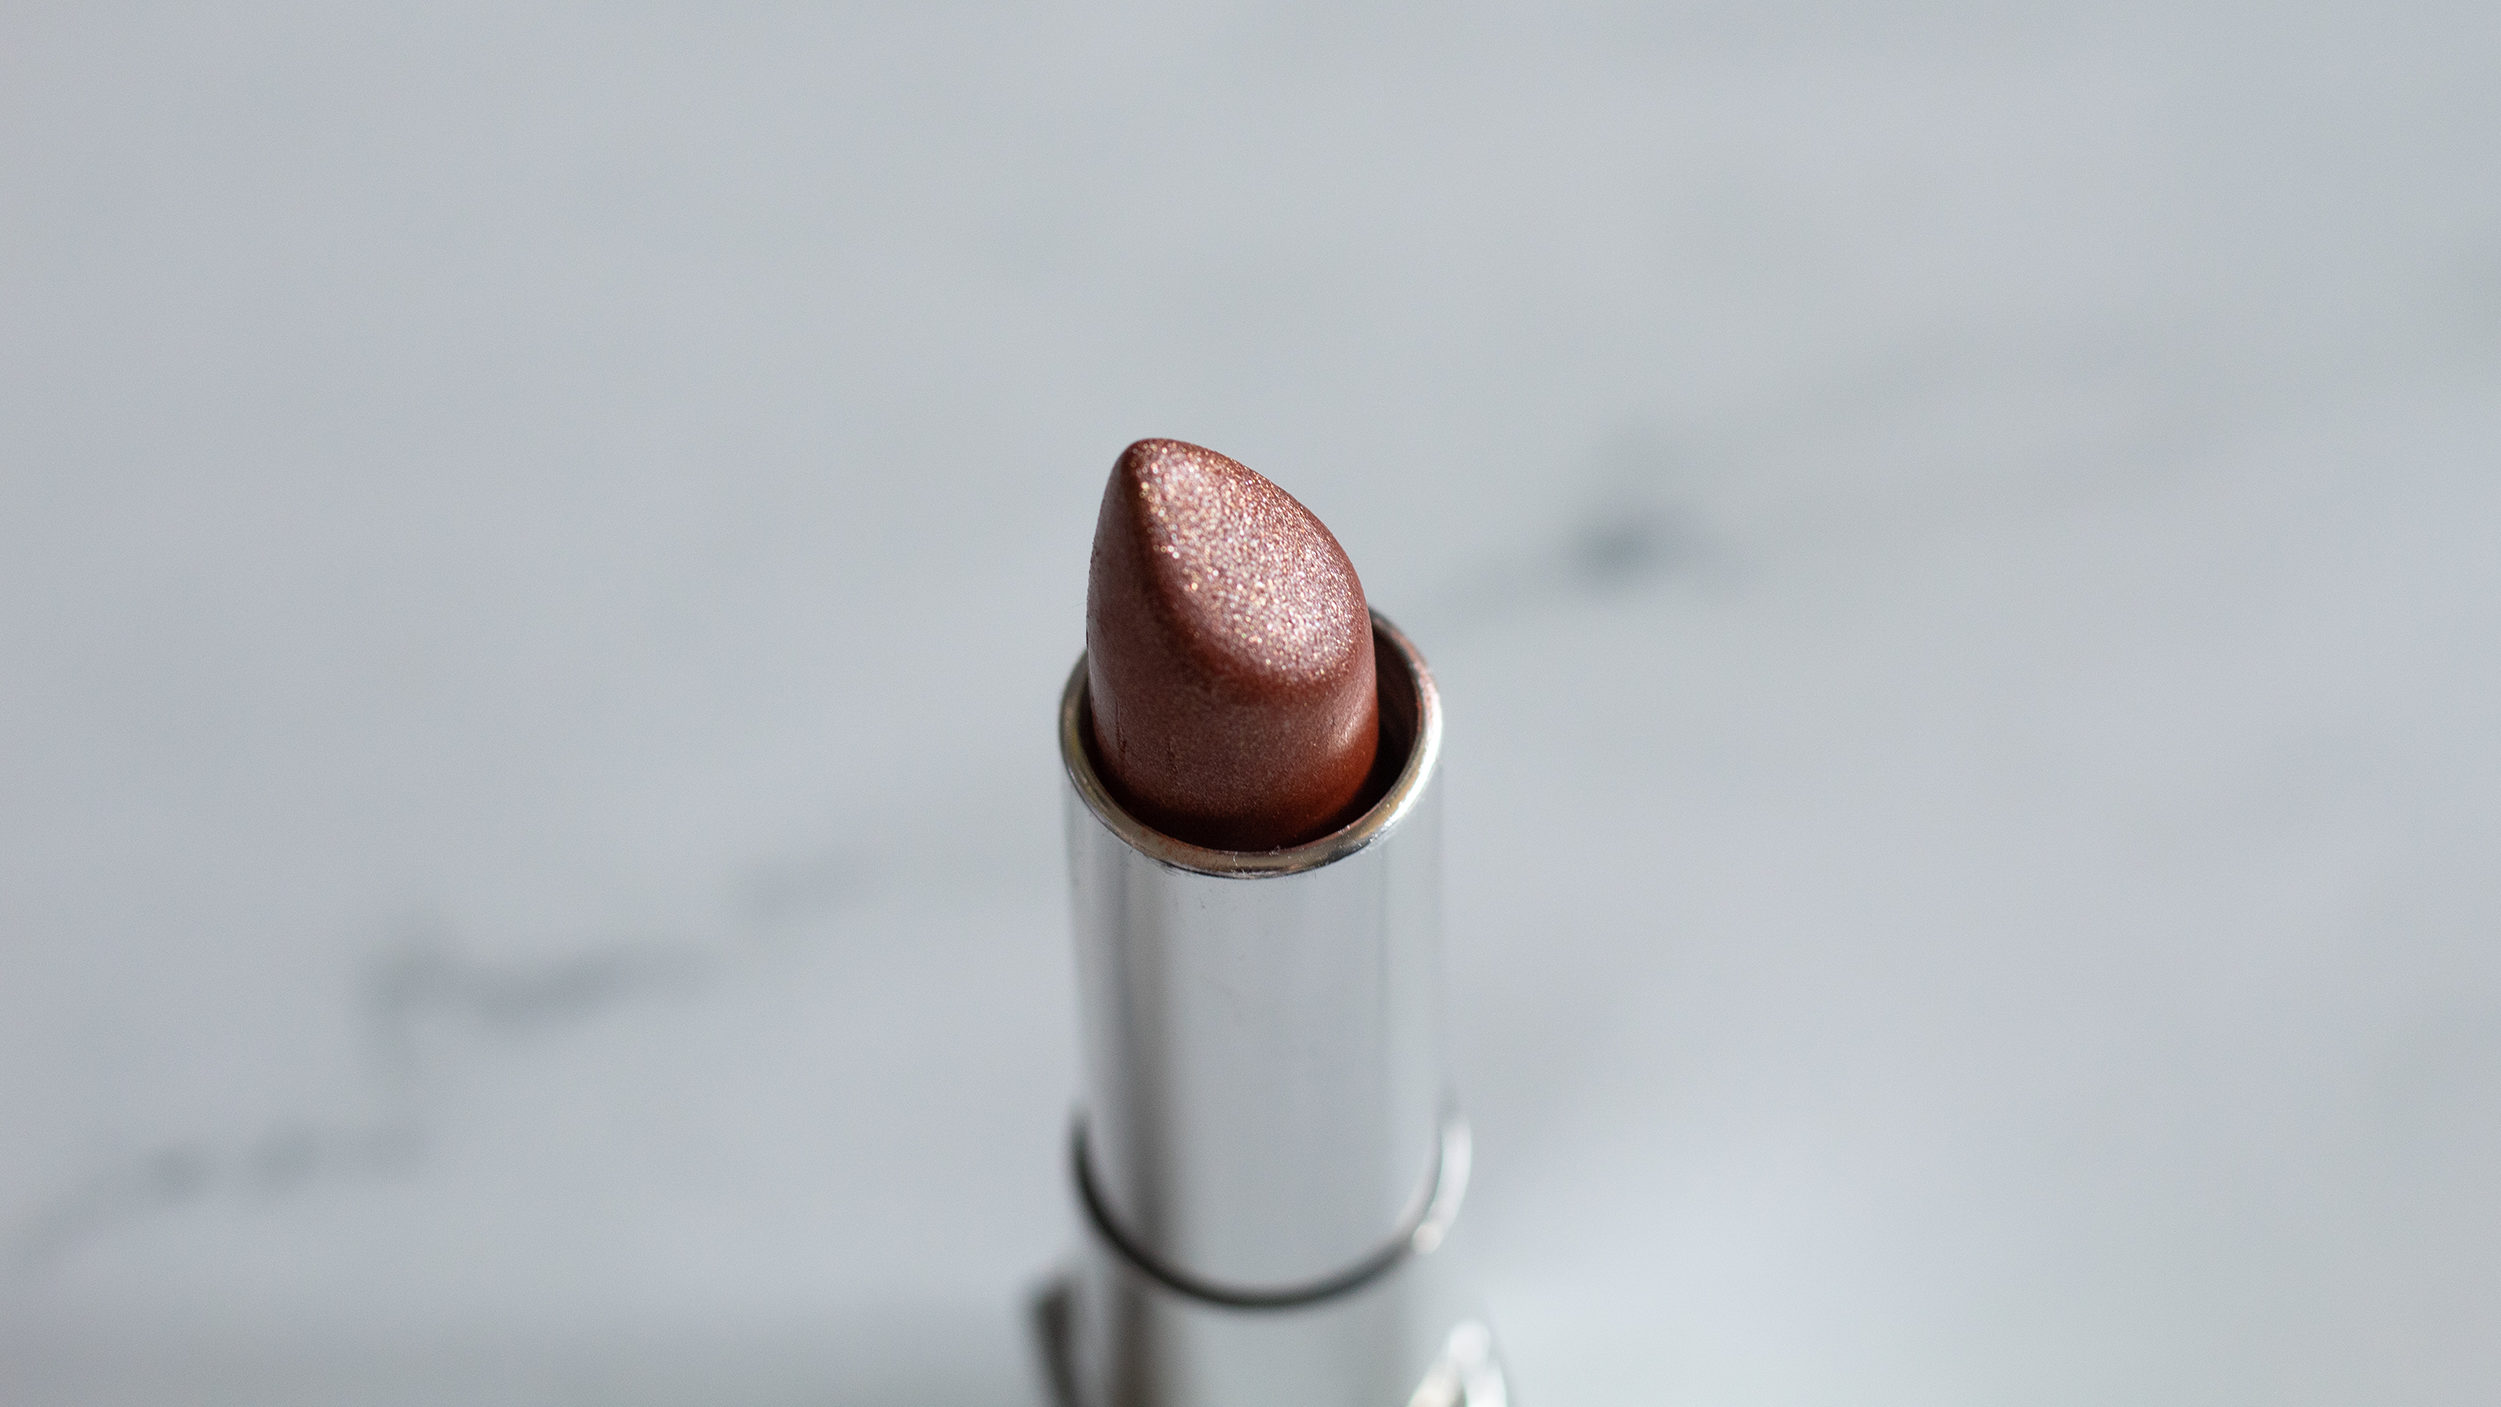 A silver tube of lipstick with a copper/gold lipstick against a white marble background